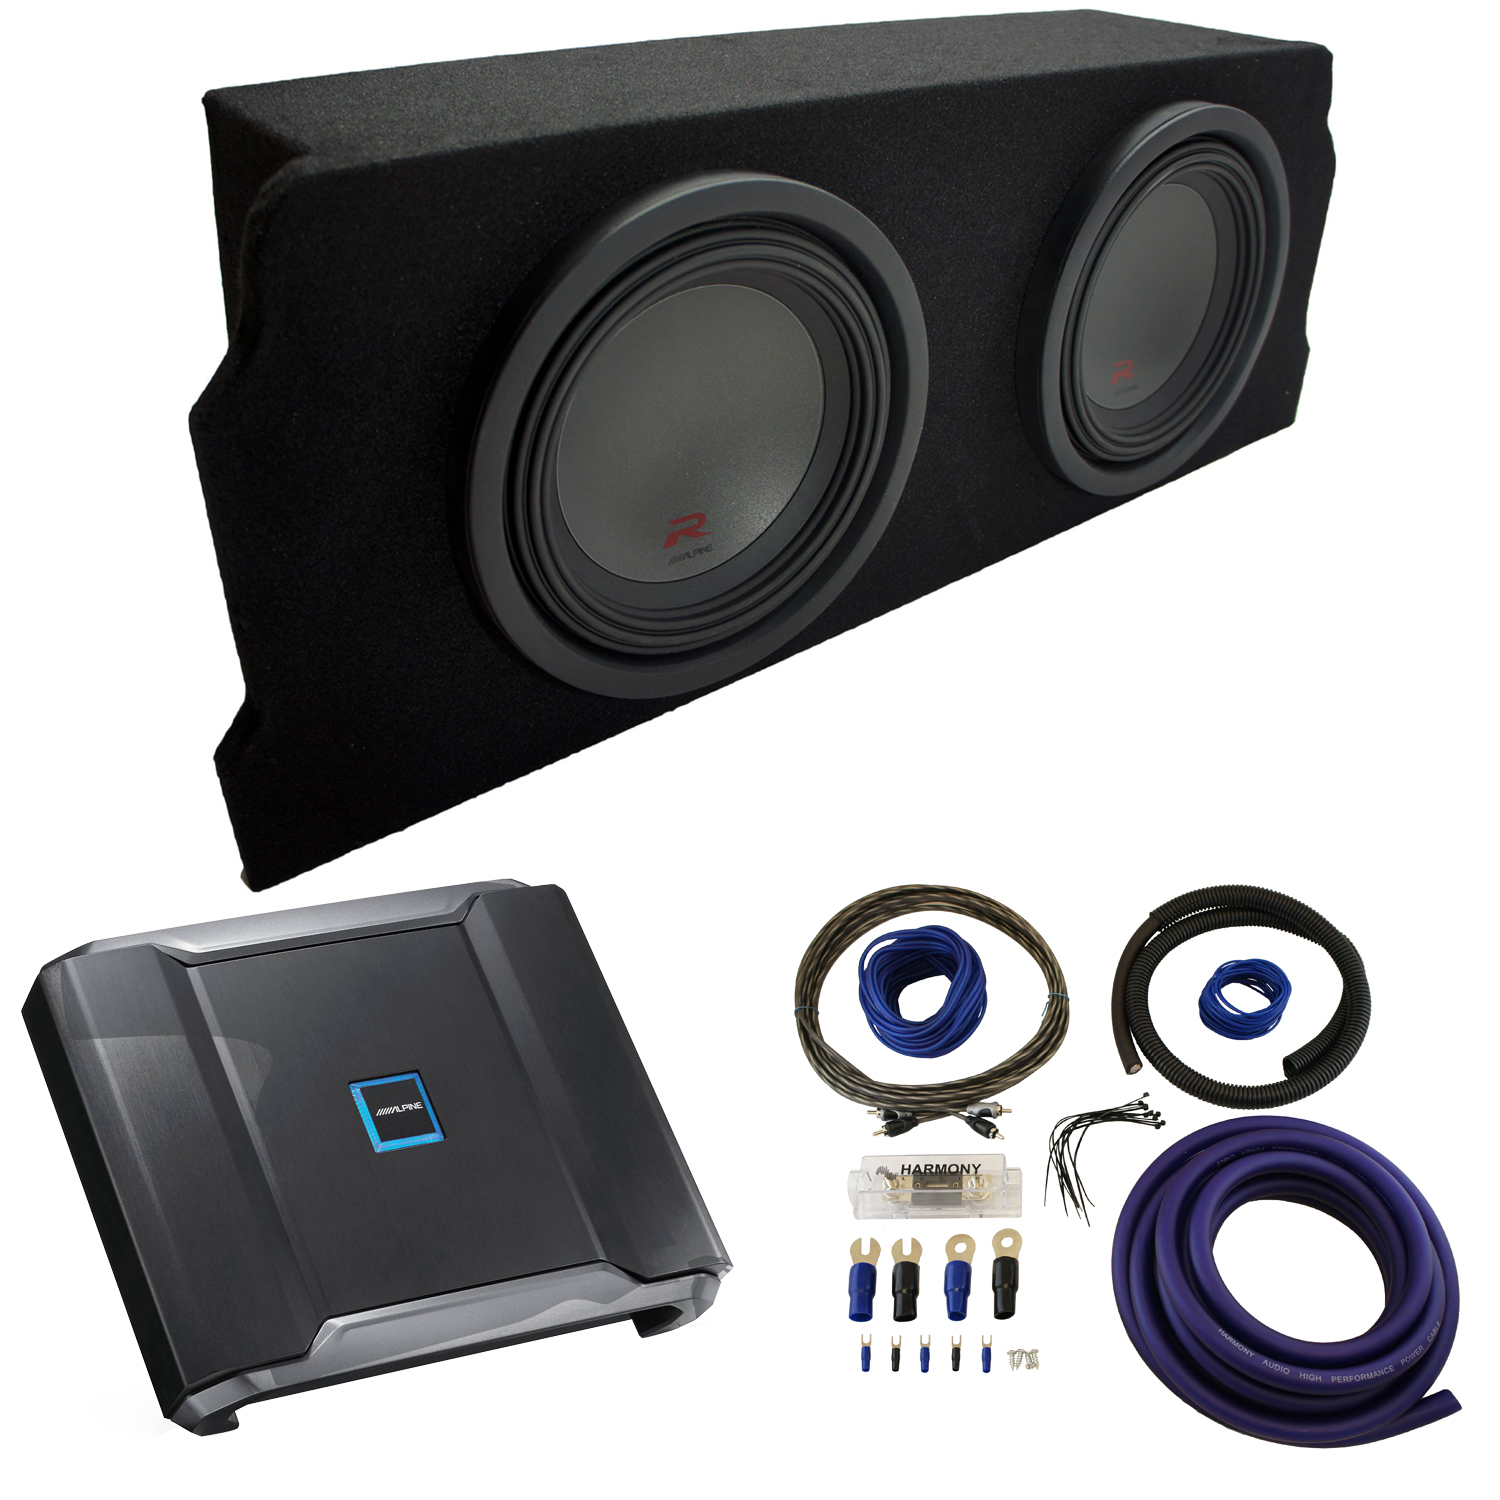 2004-2008 Mazda RX-8 Coupe Alpine Type R R-W10D2 Dual 10" Sub Box Enclosure Package with R-A75M Amplifier & 0GA Amp Kit